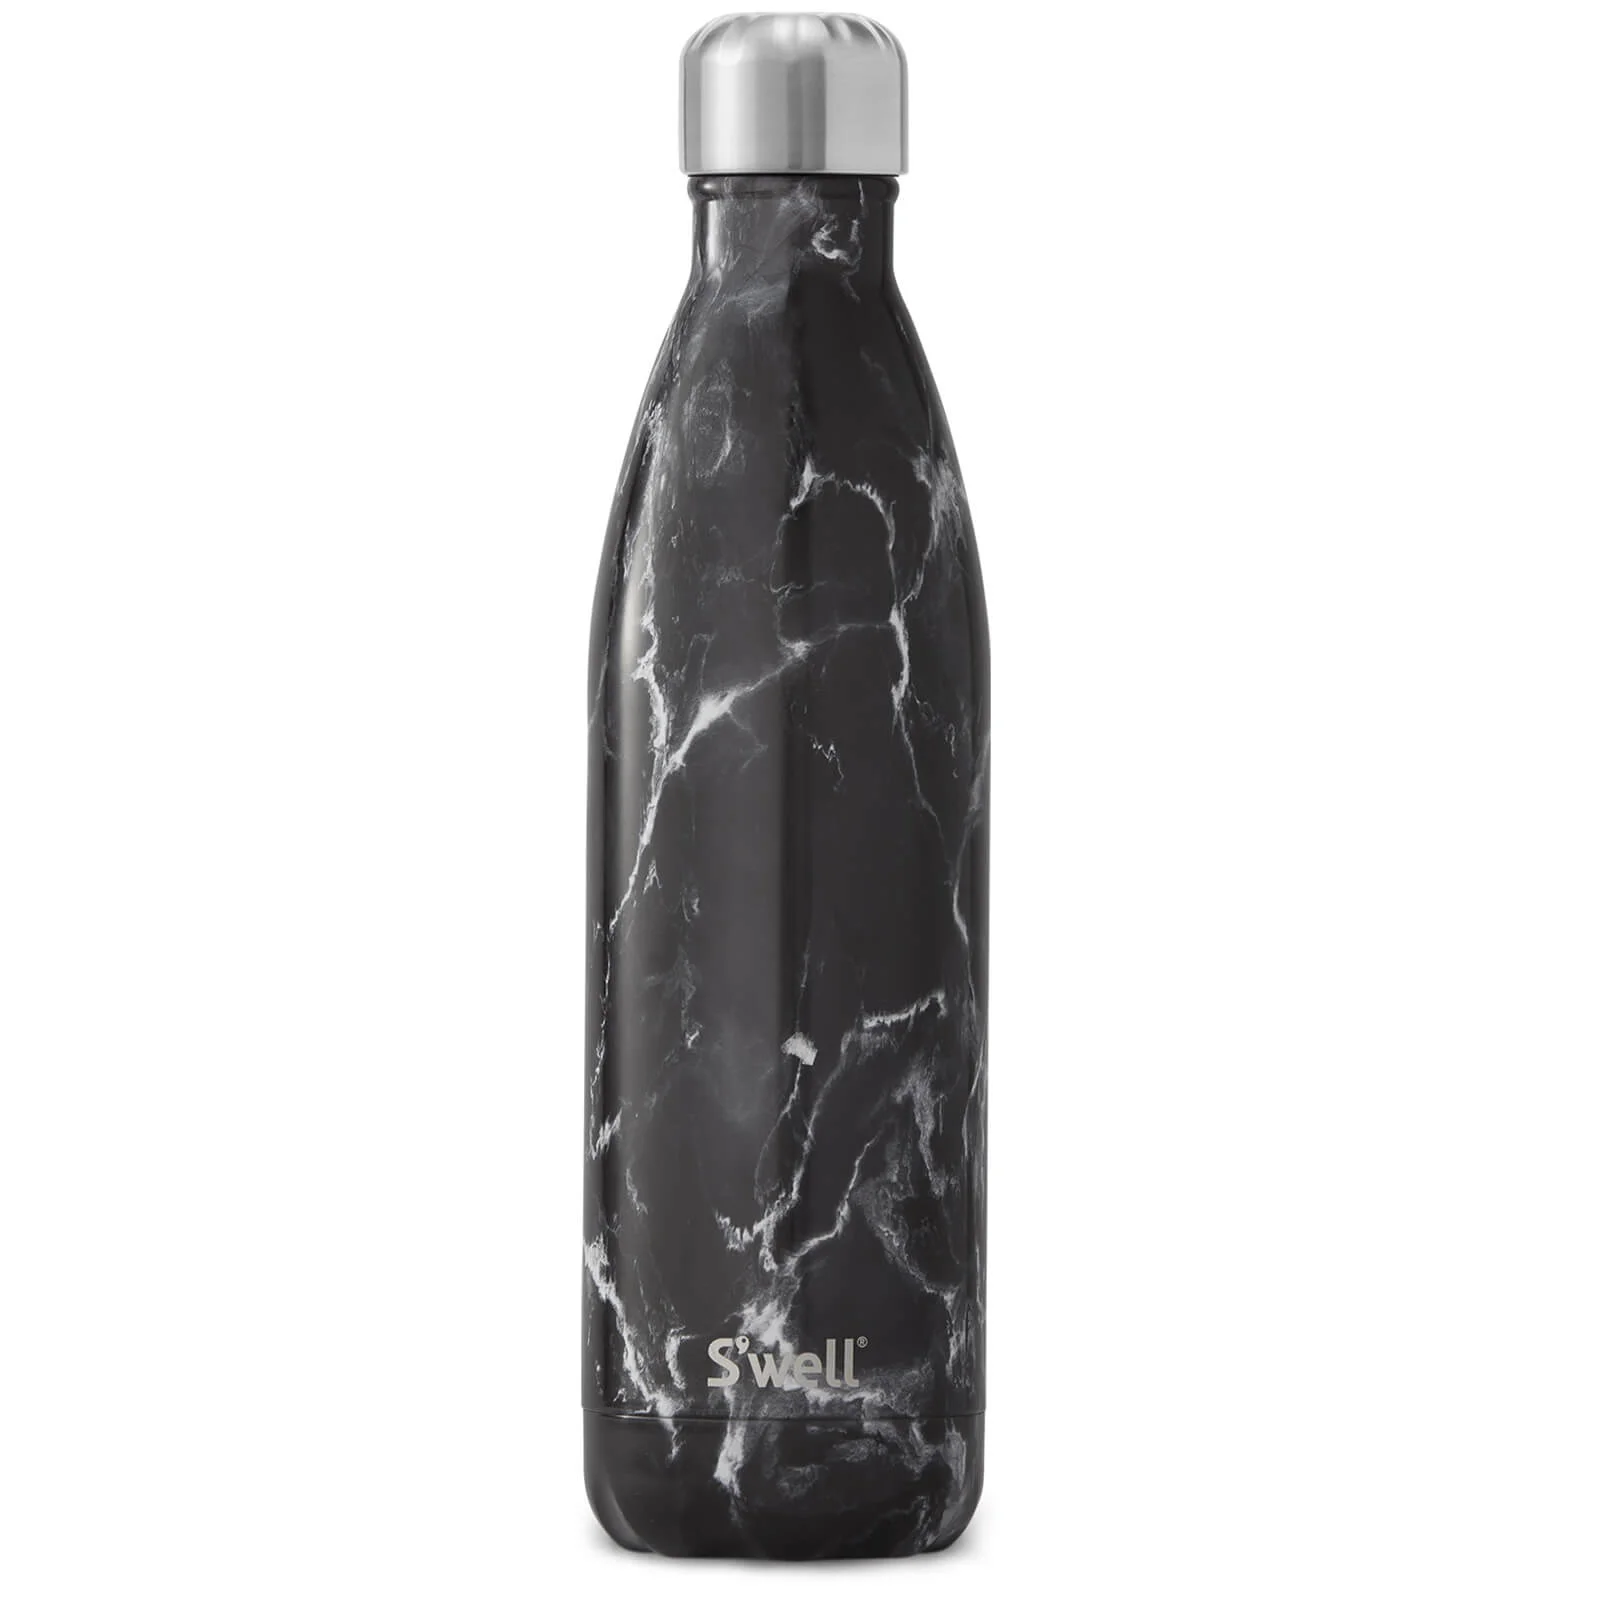 S'well Black Marble Water Bottle 750ml Image 1